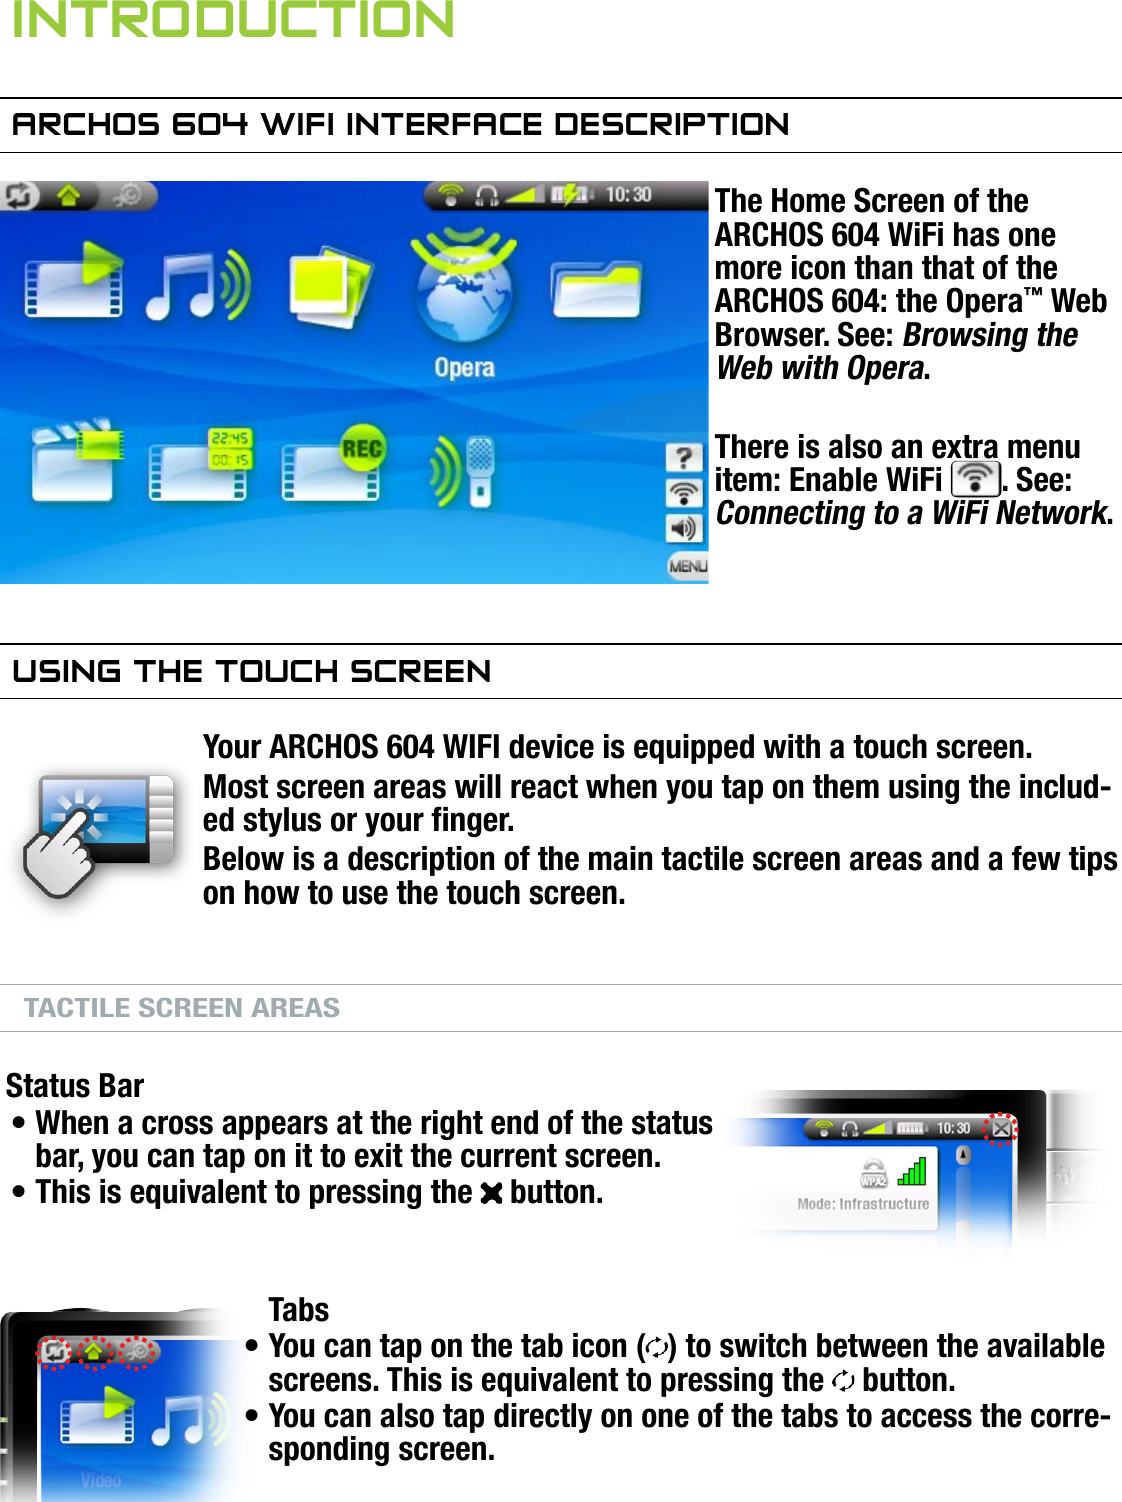 604MANUAL V1.0 wifi INTRODUCTION   &gt;   p. 3inTrOduCTiOnarChOs 604 wifi inTerfaCe desCripTiOnThe Home Screen of the ARCHOS 604 WiFi has one more icon than that of the ARCHOS 604: the Opera™ Web Browser. See: Browsing the Web with Opera.There is also an extra menu item: Enable WiFi  . See: Connecting to a WiFi Network.using The TOuCh sCreenYour ARCHOS 604 WIFI device is equipped with a touch screen.Most screen areas will react when you tap on them using the includ-ed stylus or your nger.Below is a description of the main tactile screen areas and a few tips on how to use the touch screen.TACTILE SCREEN AREASStatus BarWhen a cross appears at the right end of the status bar, you can tap on it to exit the current screen.This is equivalent to pressing the   button.TabsYou can tap on the tab icon ( ) to switch between the available screens. This is equivalent to pressing the   button.You can also tap directly on one of the tabs to access the corre-sponding screen.••••